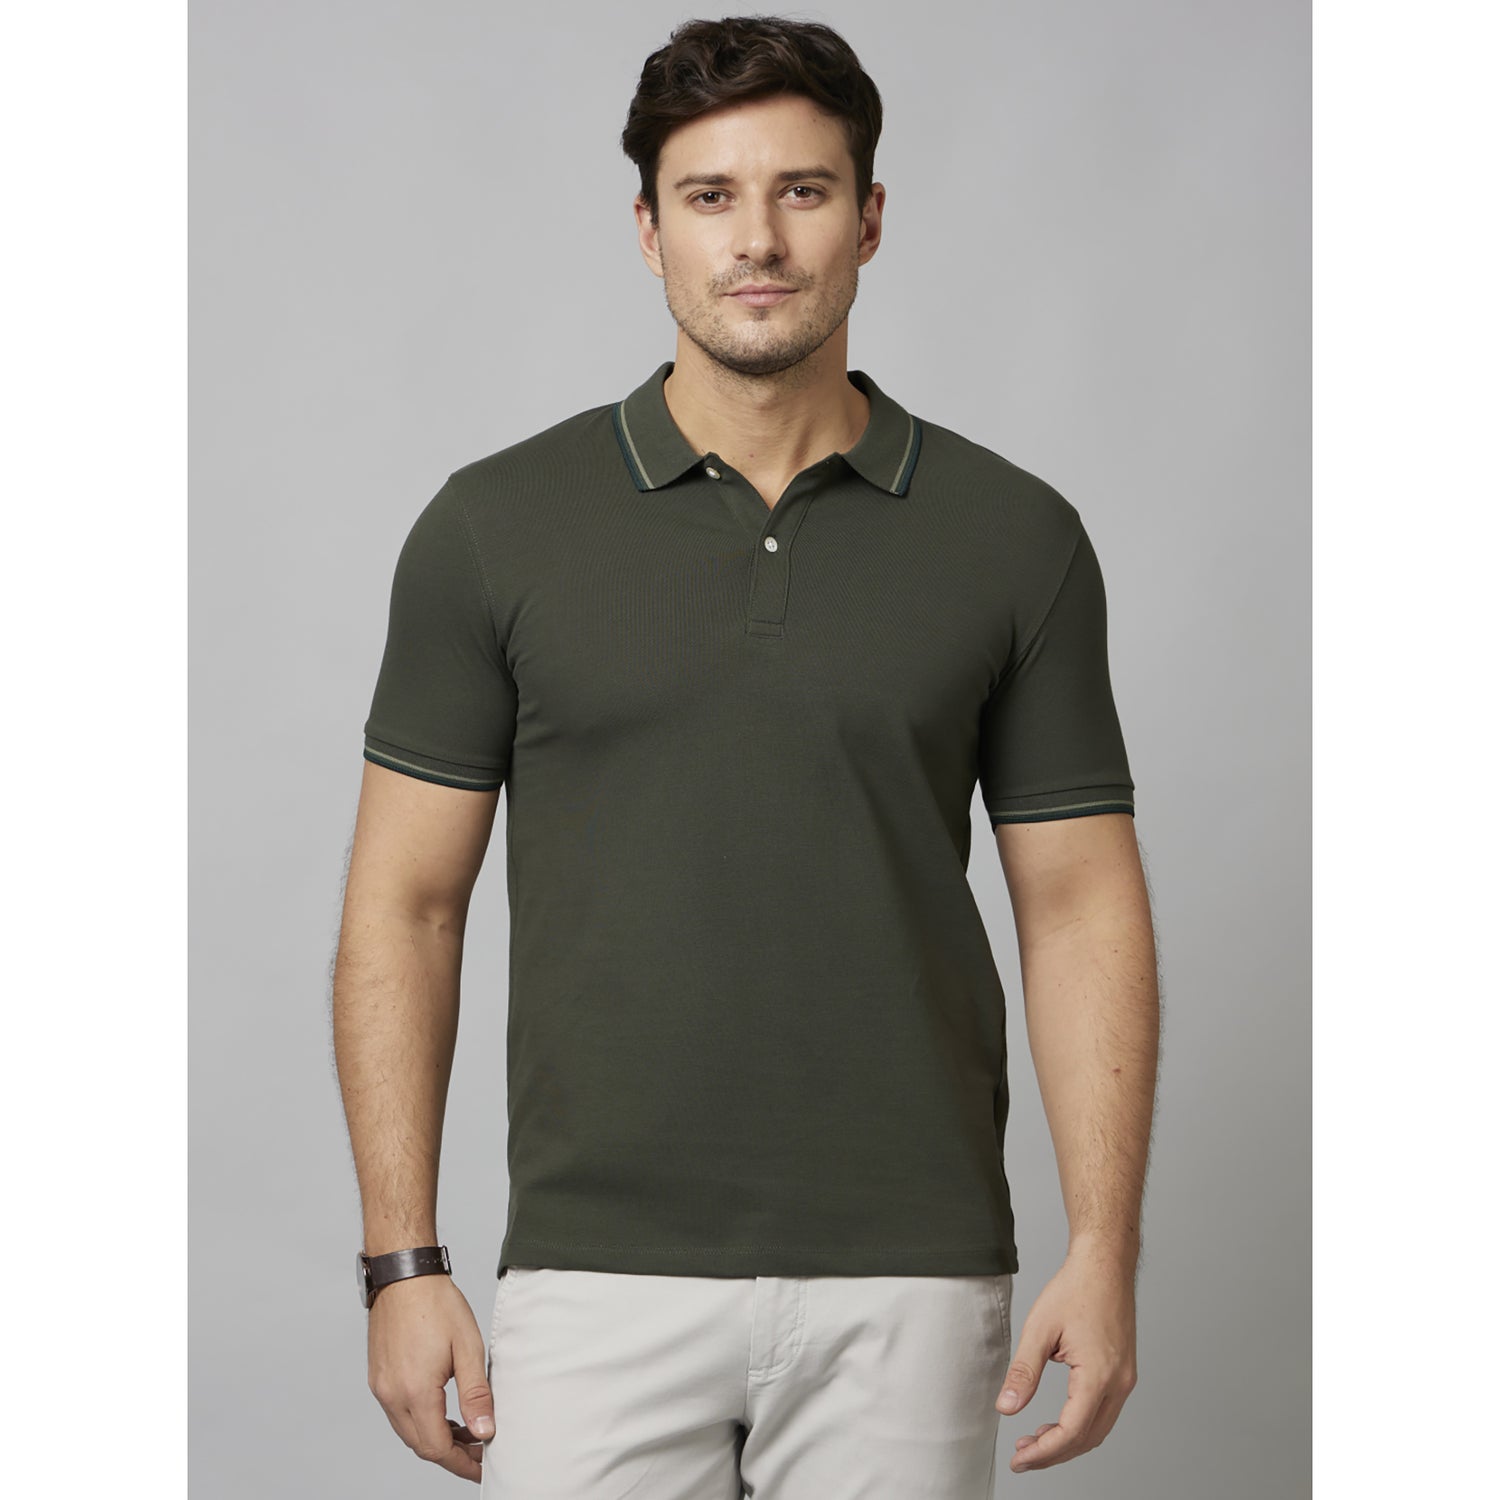 Olive Solid Short Sleeve Cotton Blend T-Shirts (DECOLRAYEB2)